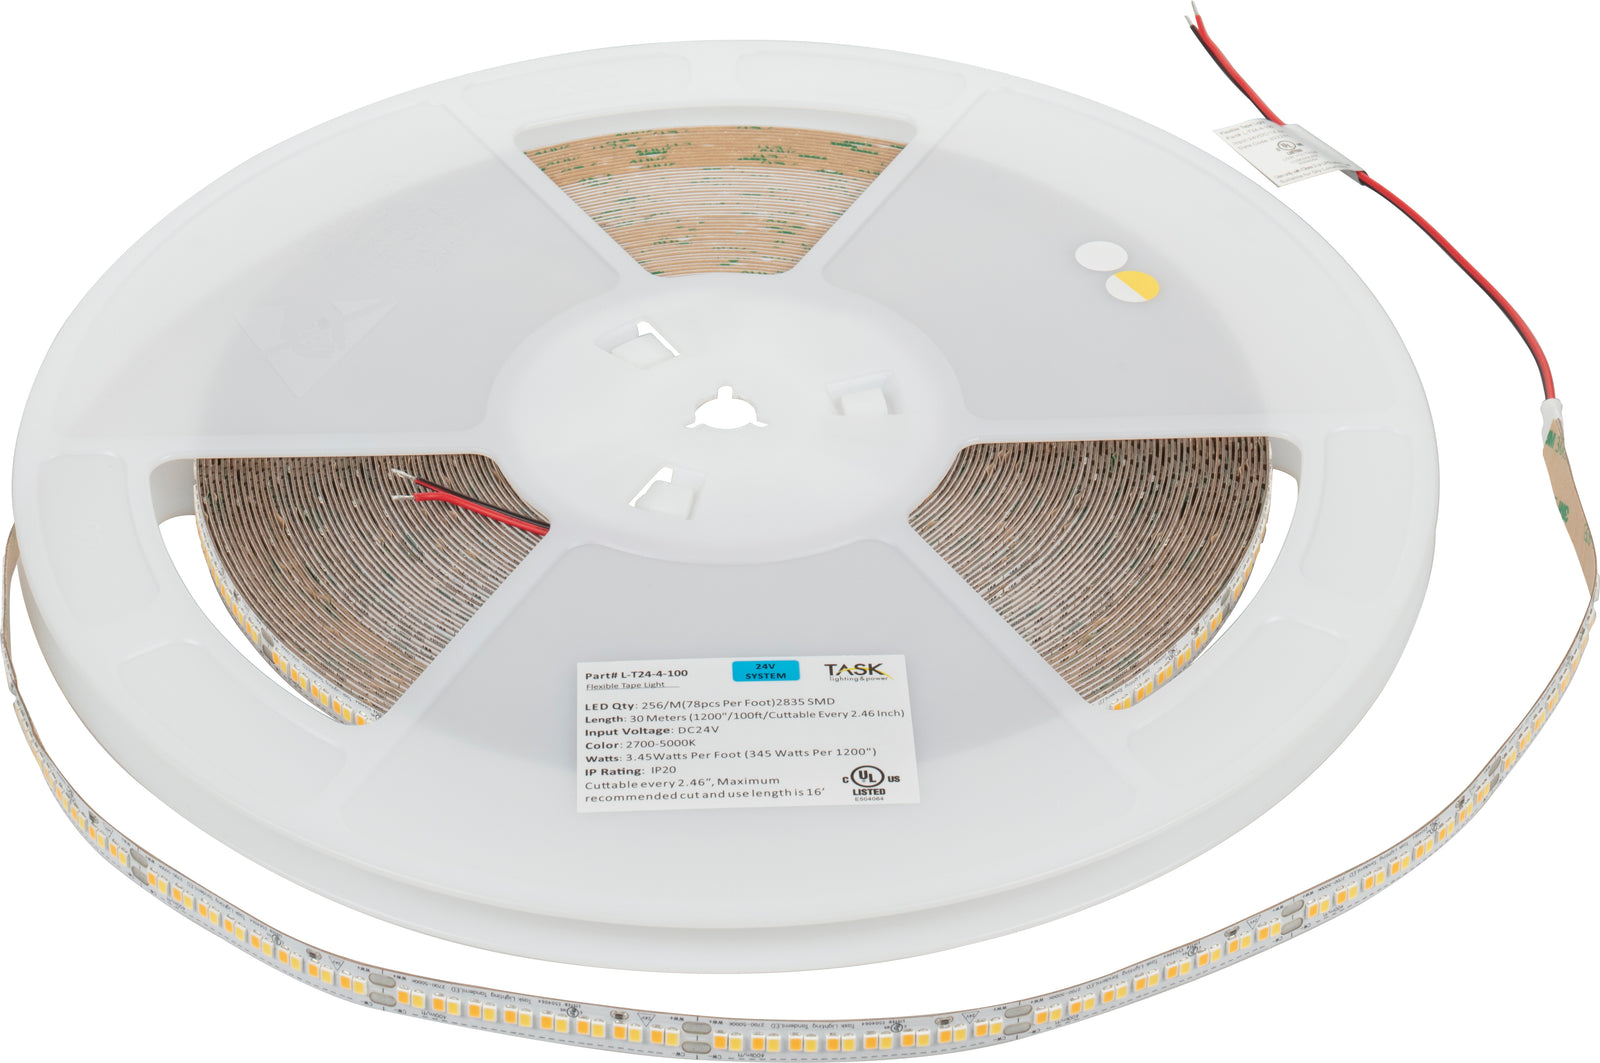 Tunable-White 24V Tape Light with TandemLED Technology - 400 Lumens/Ft